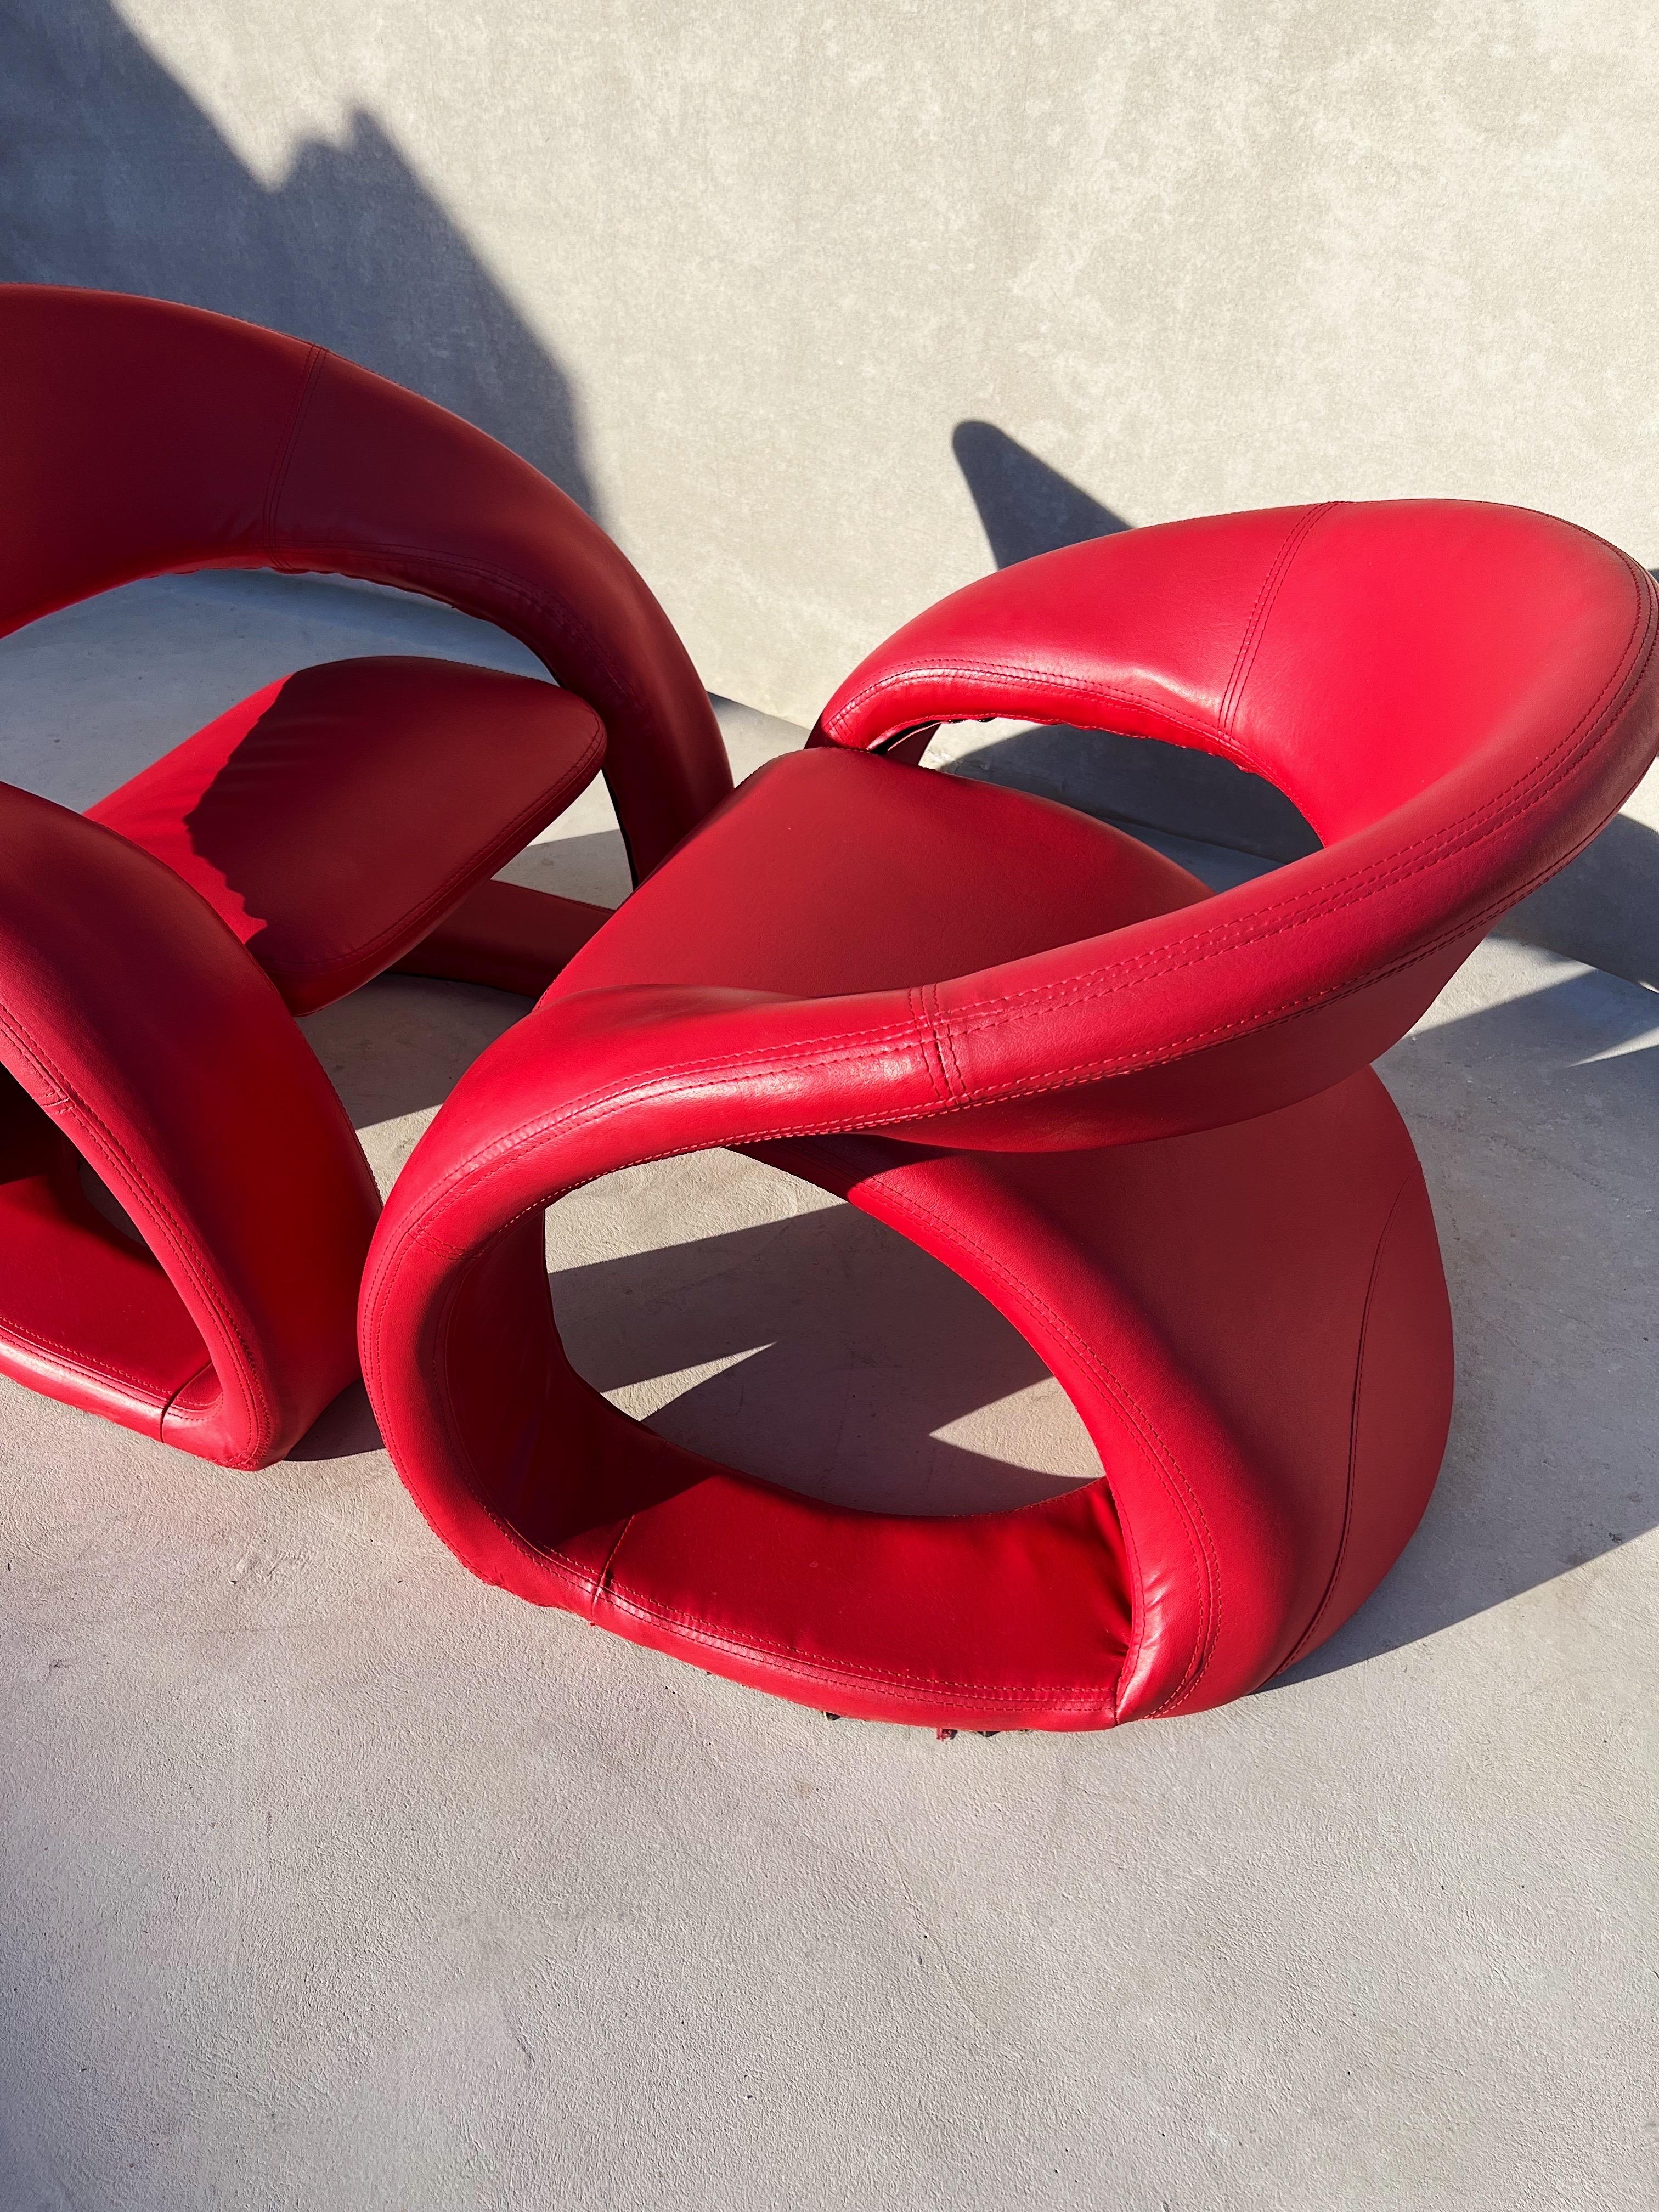 Vintage Pair of Sculptural Chairs in Electric Red, Attributed to Jaymar 2